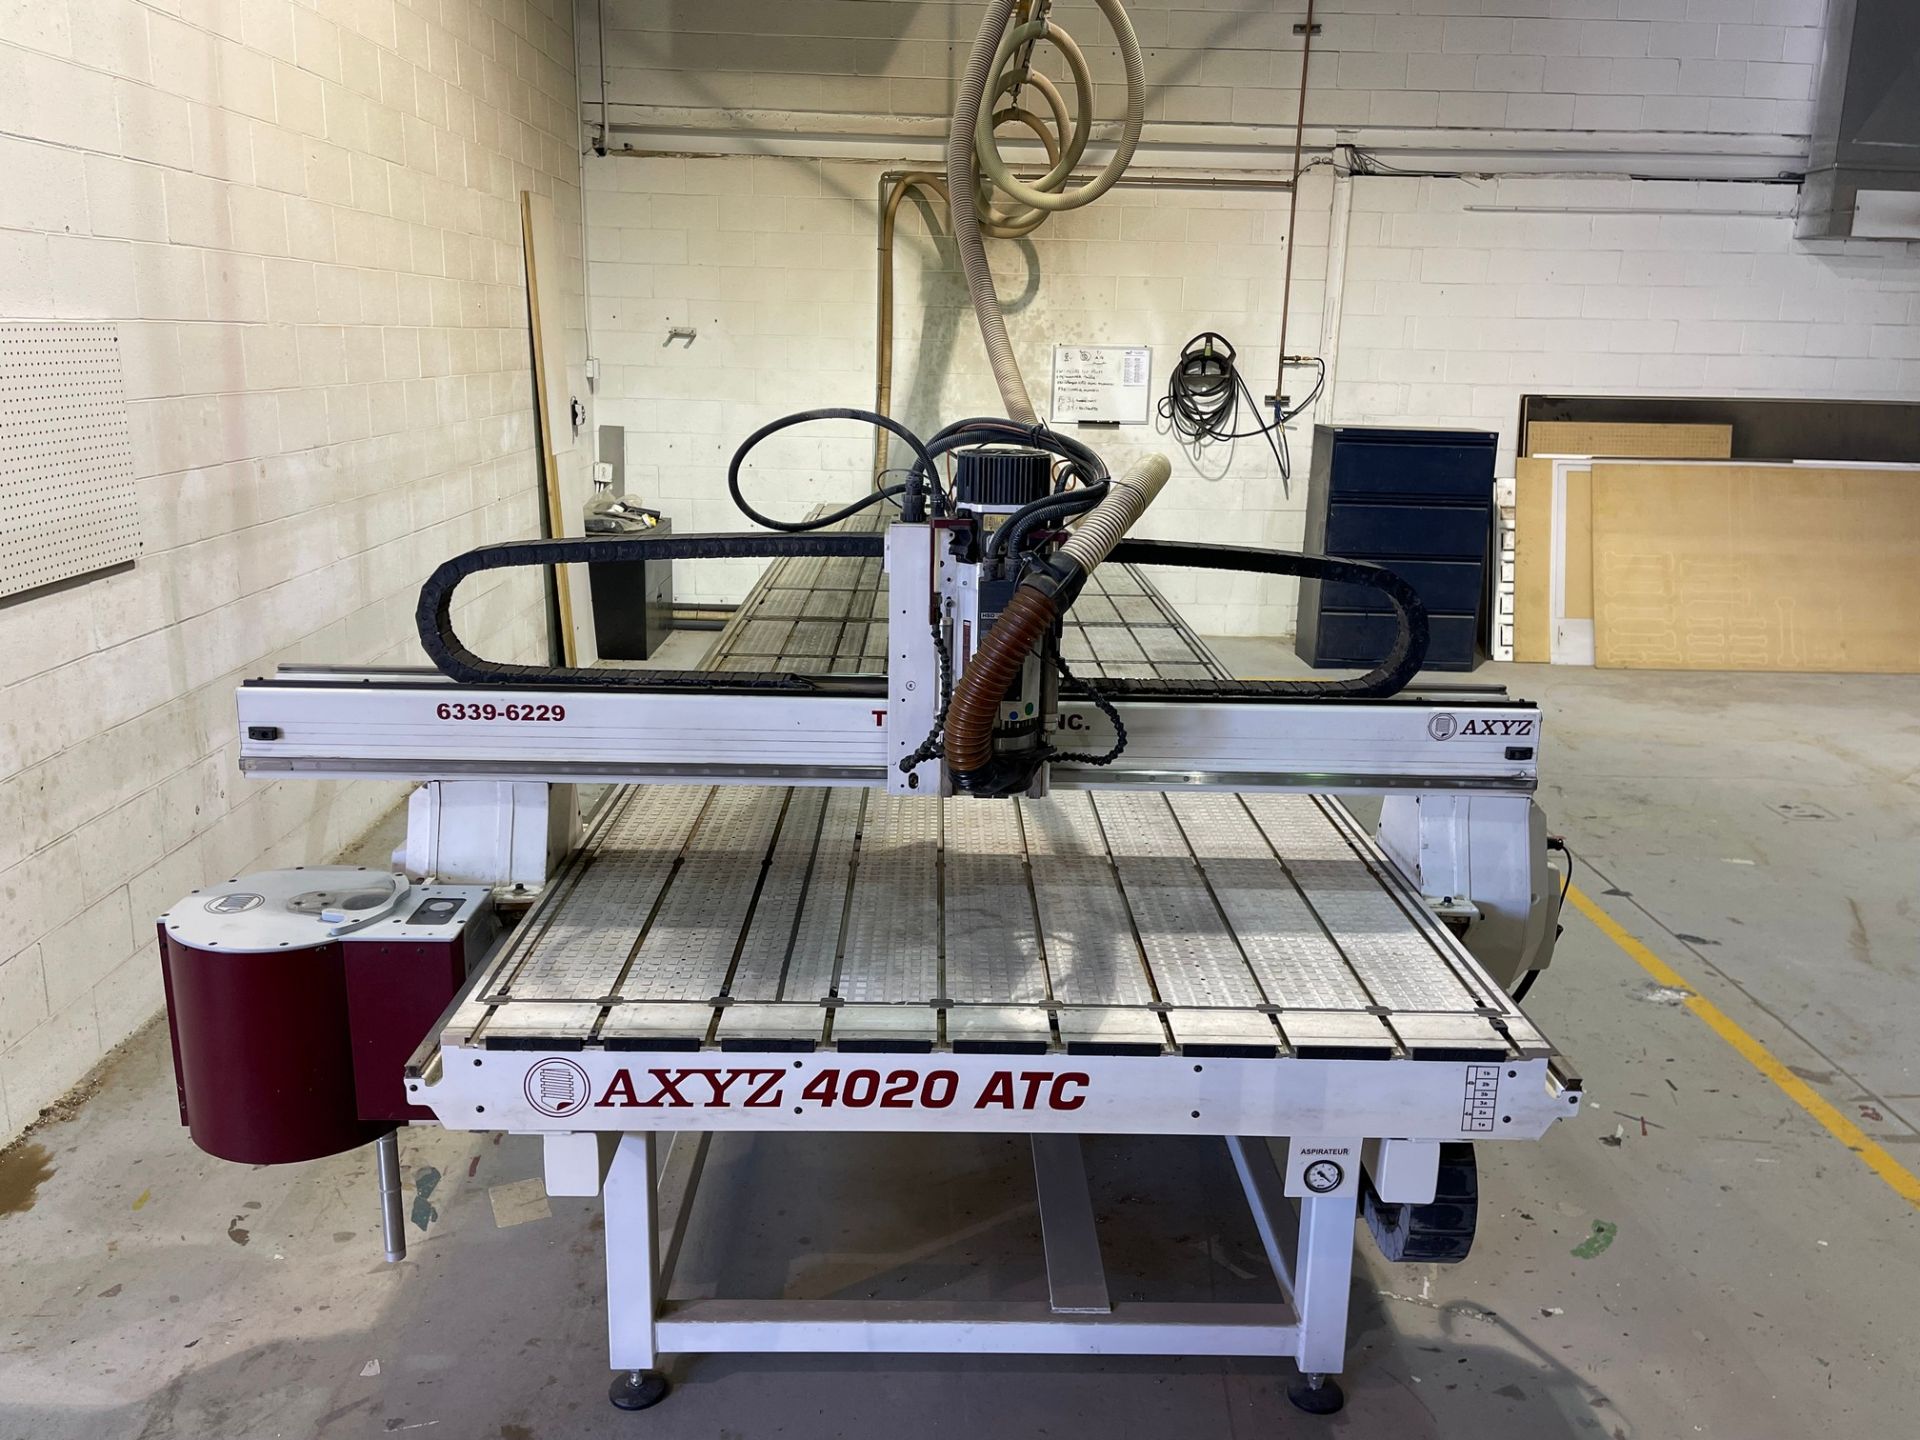 2017 AXYZ 4020 ATC CNC ROUTER SYSTEM W/ 58" X 246" WORKING AREA, 10.8HP SPINDLE, VORTEX COLD GUN, - Image 2 of 18